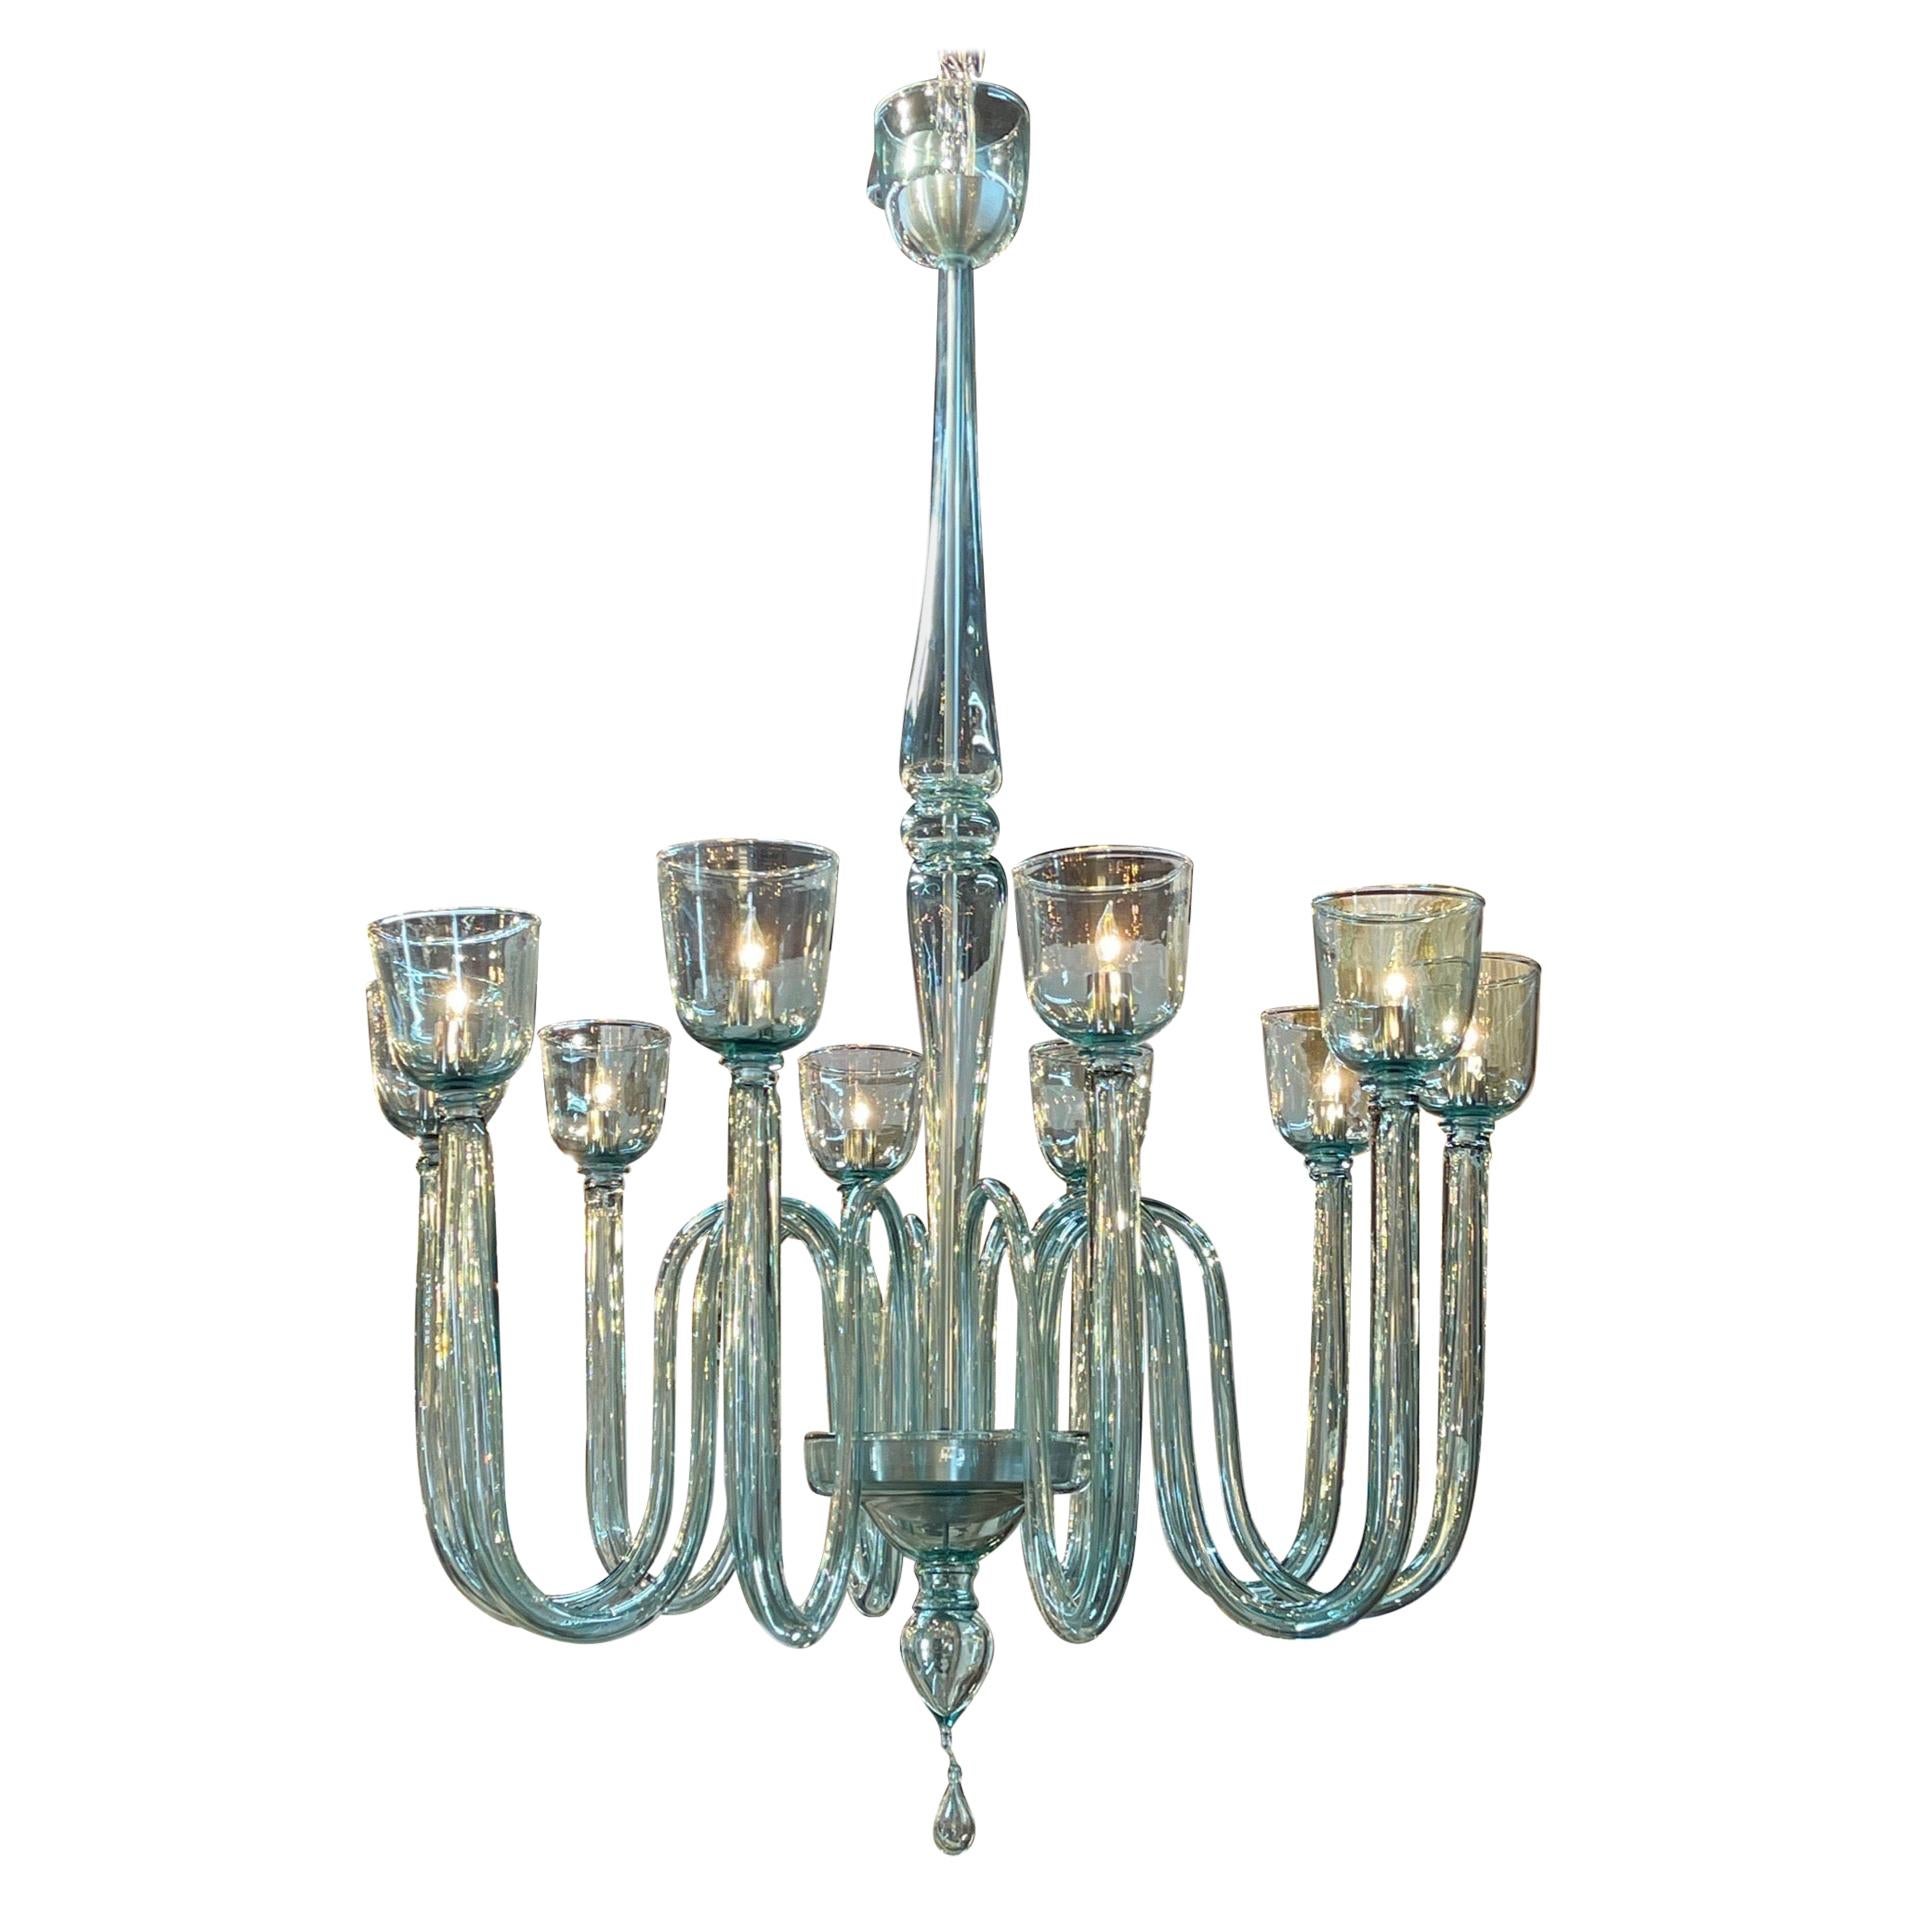 Modern Large Scale Murano Glass 10 Arm Chandelier For Sale